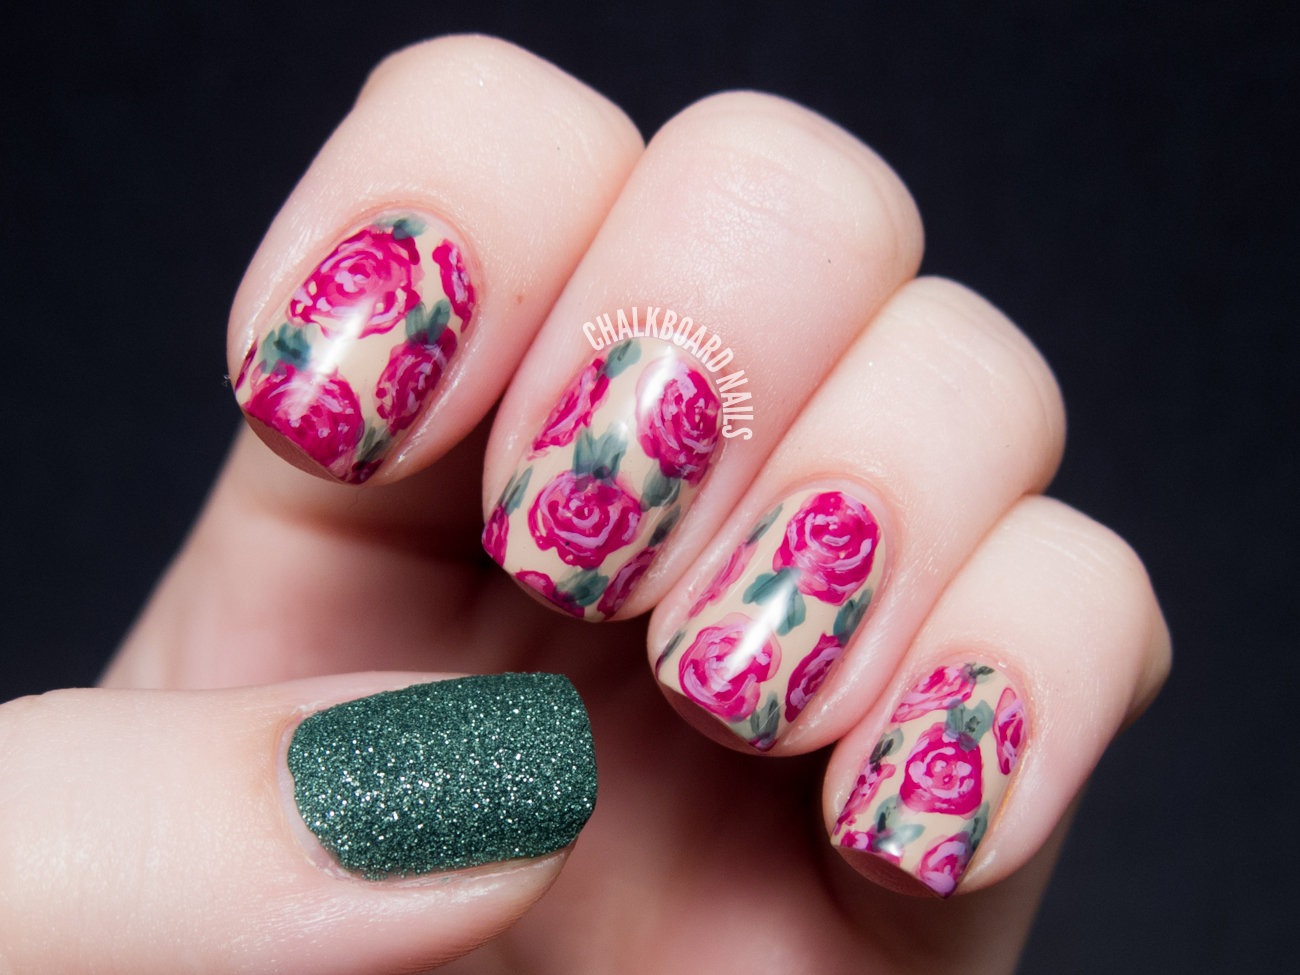 10 Beautiful Rose Nail Art Designs for Summer - wide 7